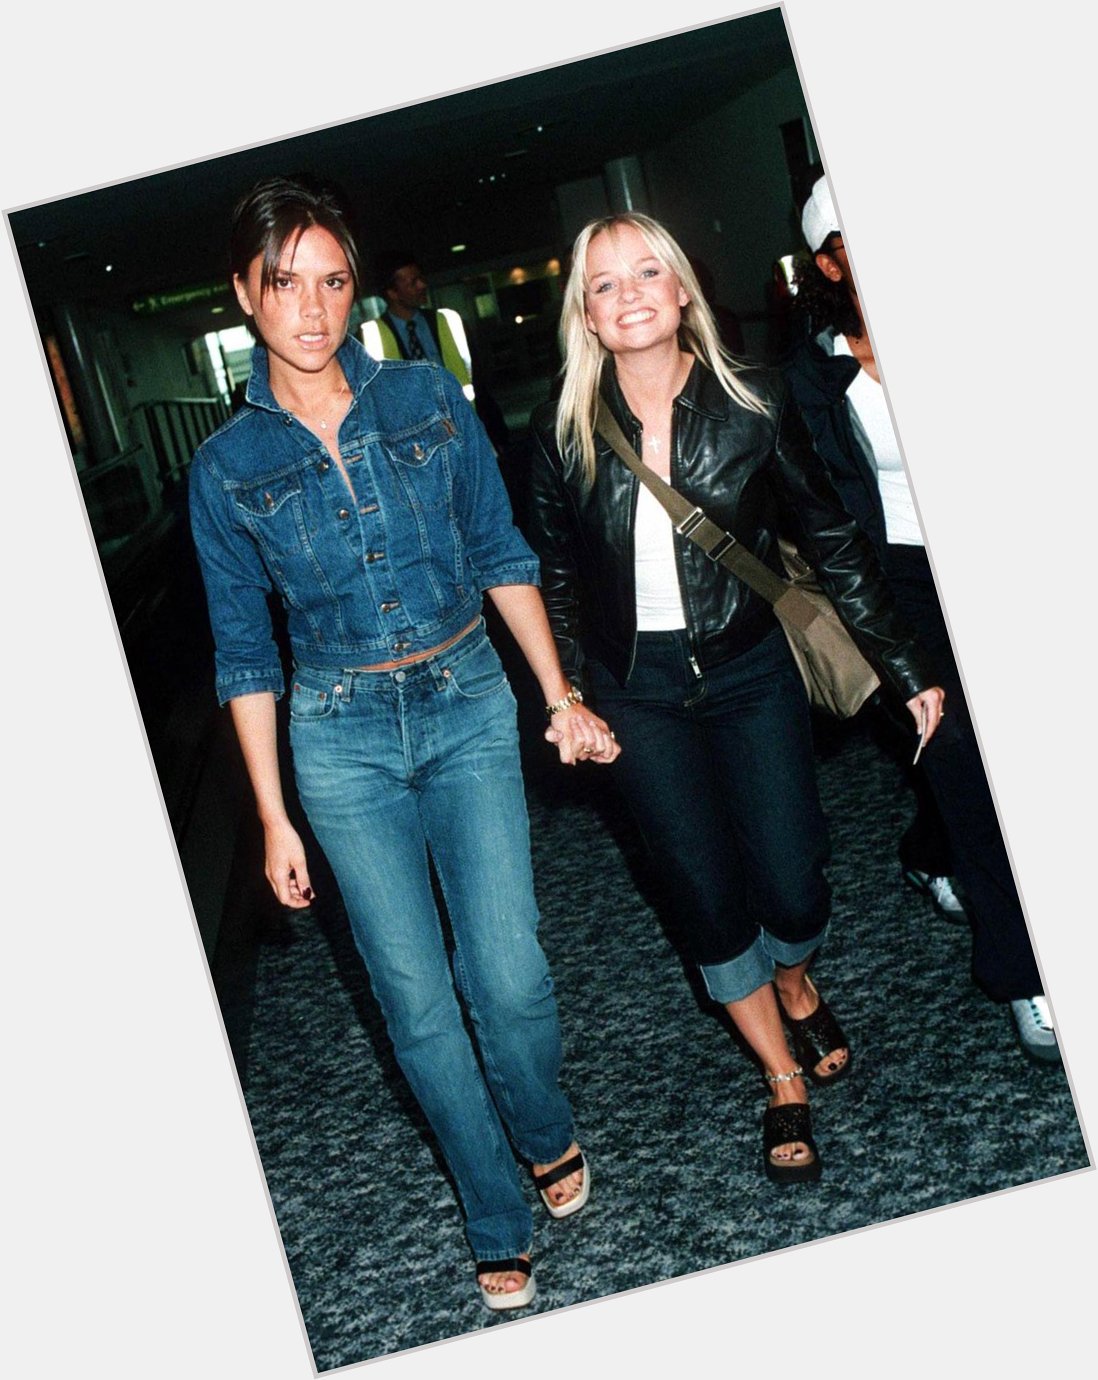 Double denim in 1998. Happy birthday to the fabulous, ever fashion-forward 